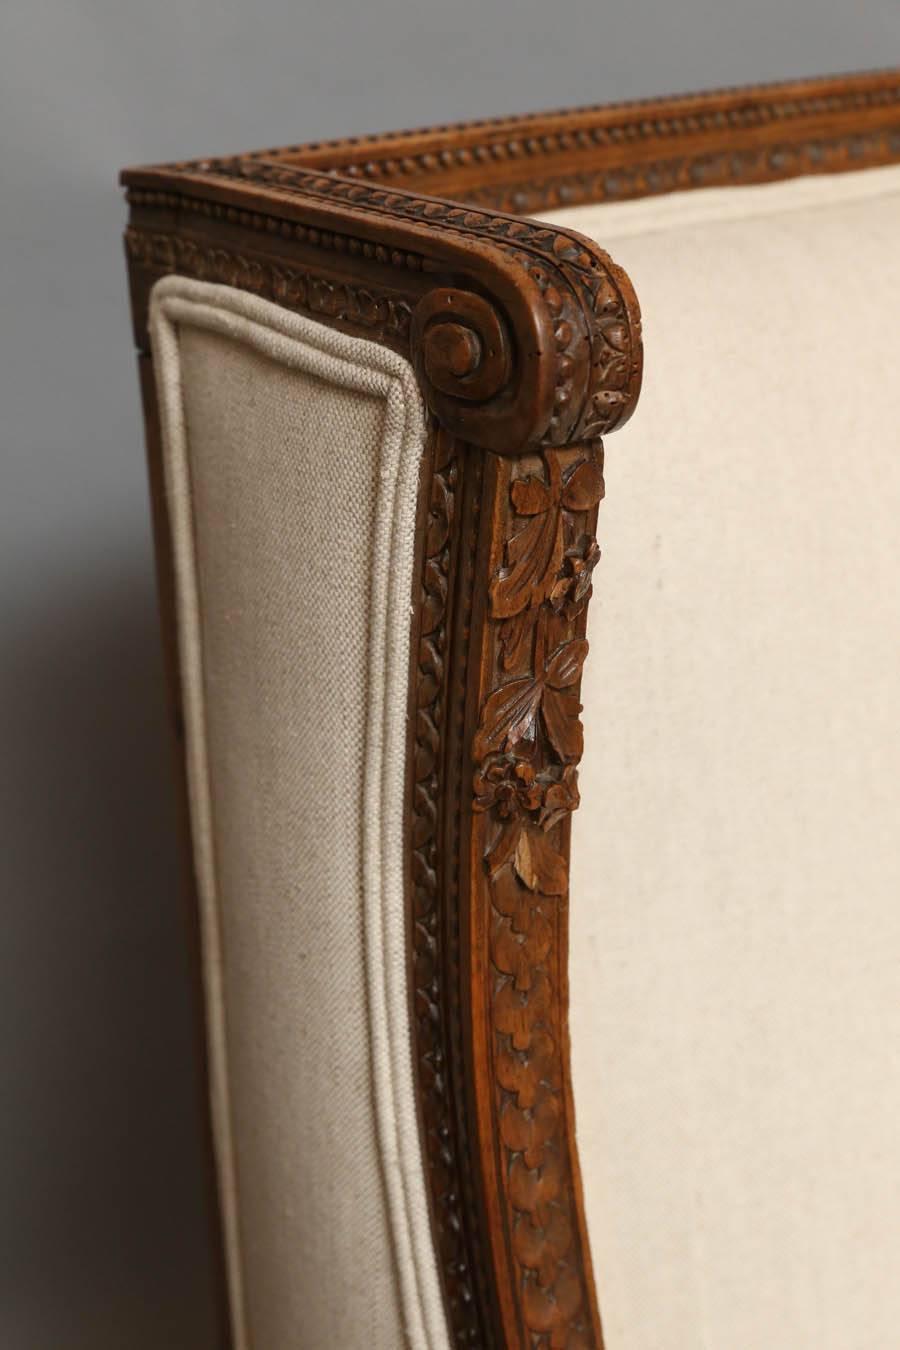 Beautiful Louis XVI style wing chairs with desirable soft aged patina. Newly upholstered in 100% linen with self welt and new padding. Highly detailed carved wood features several motifs such as egg and dart, acanthus leaves, flowers and vines,